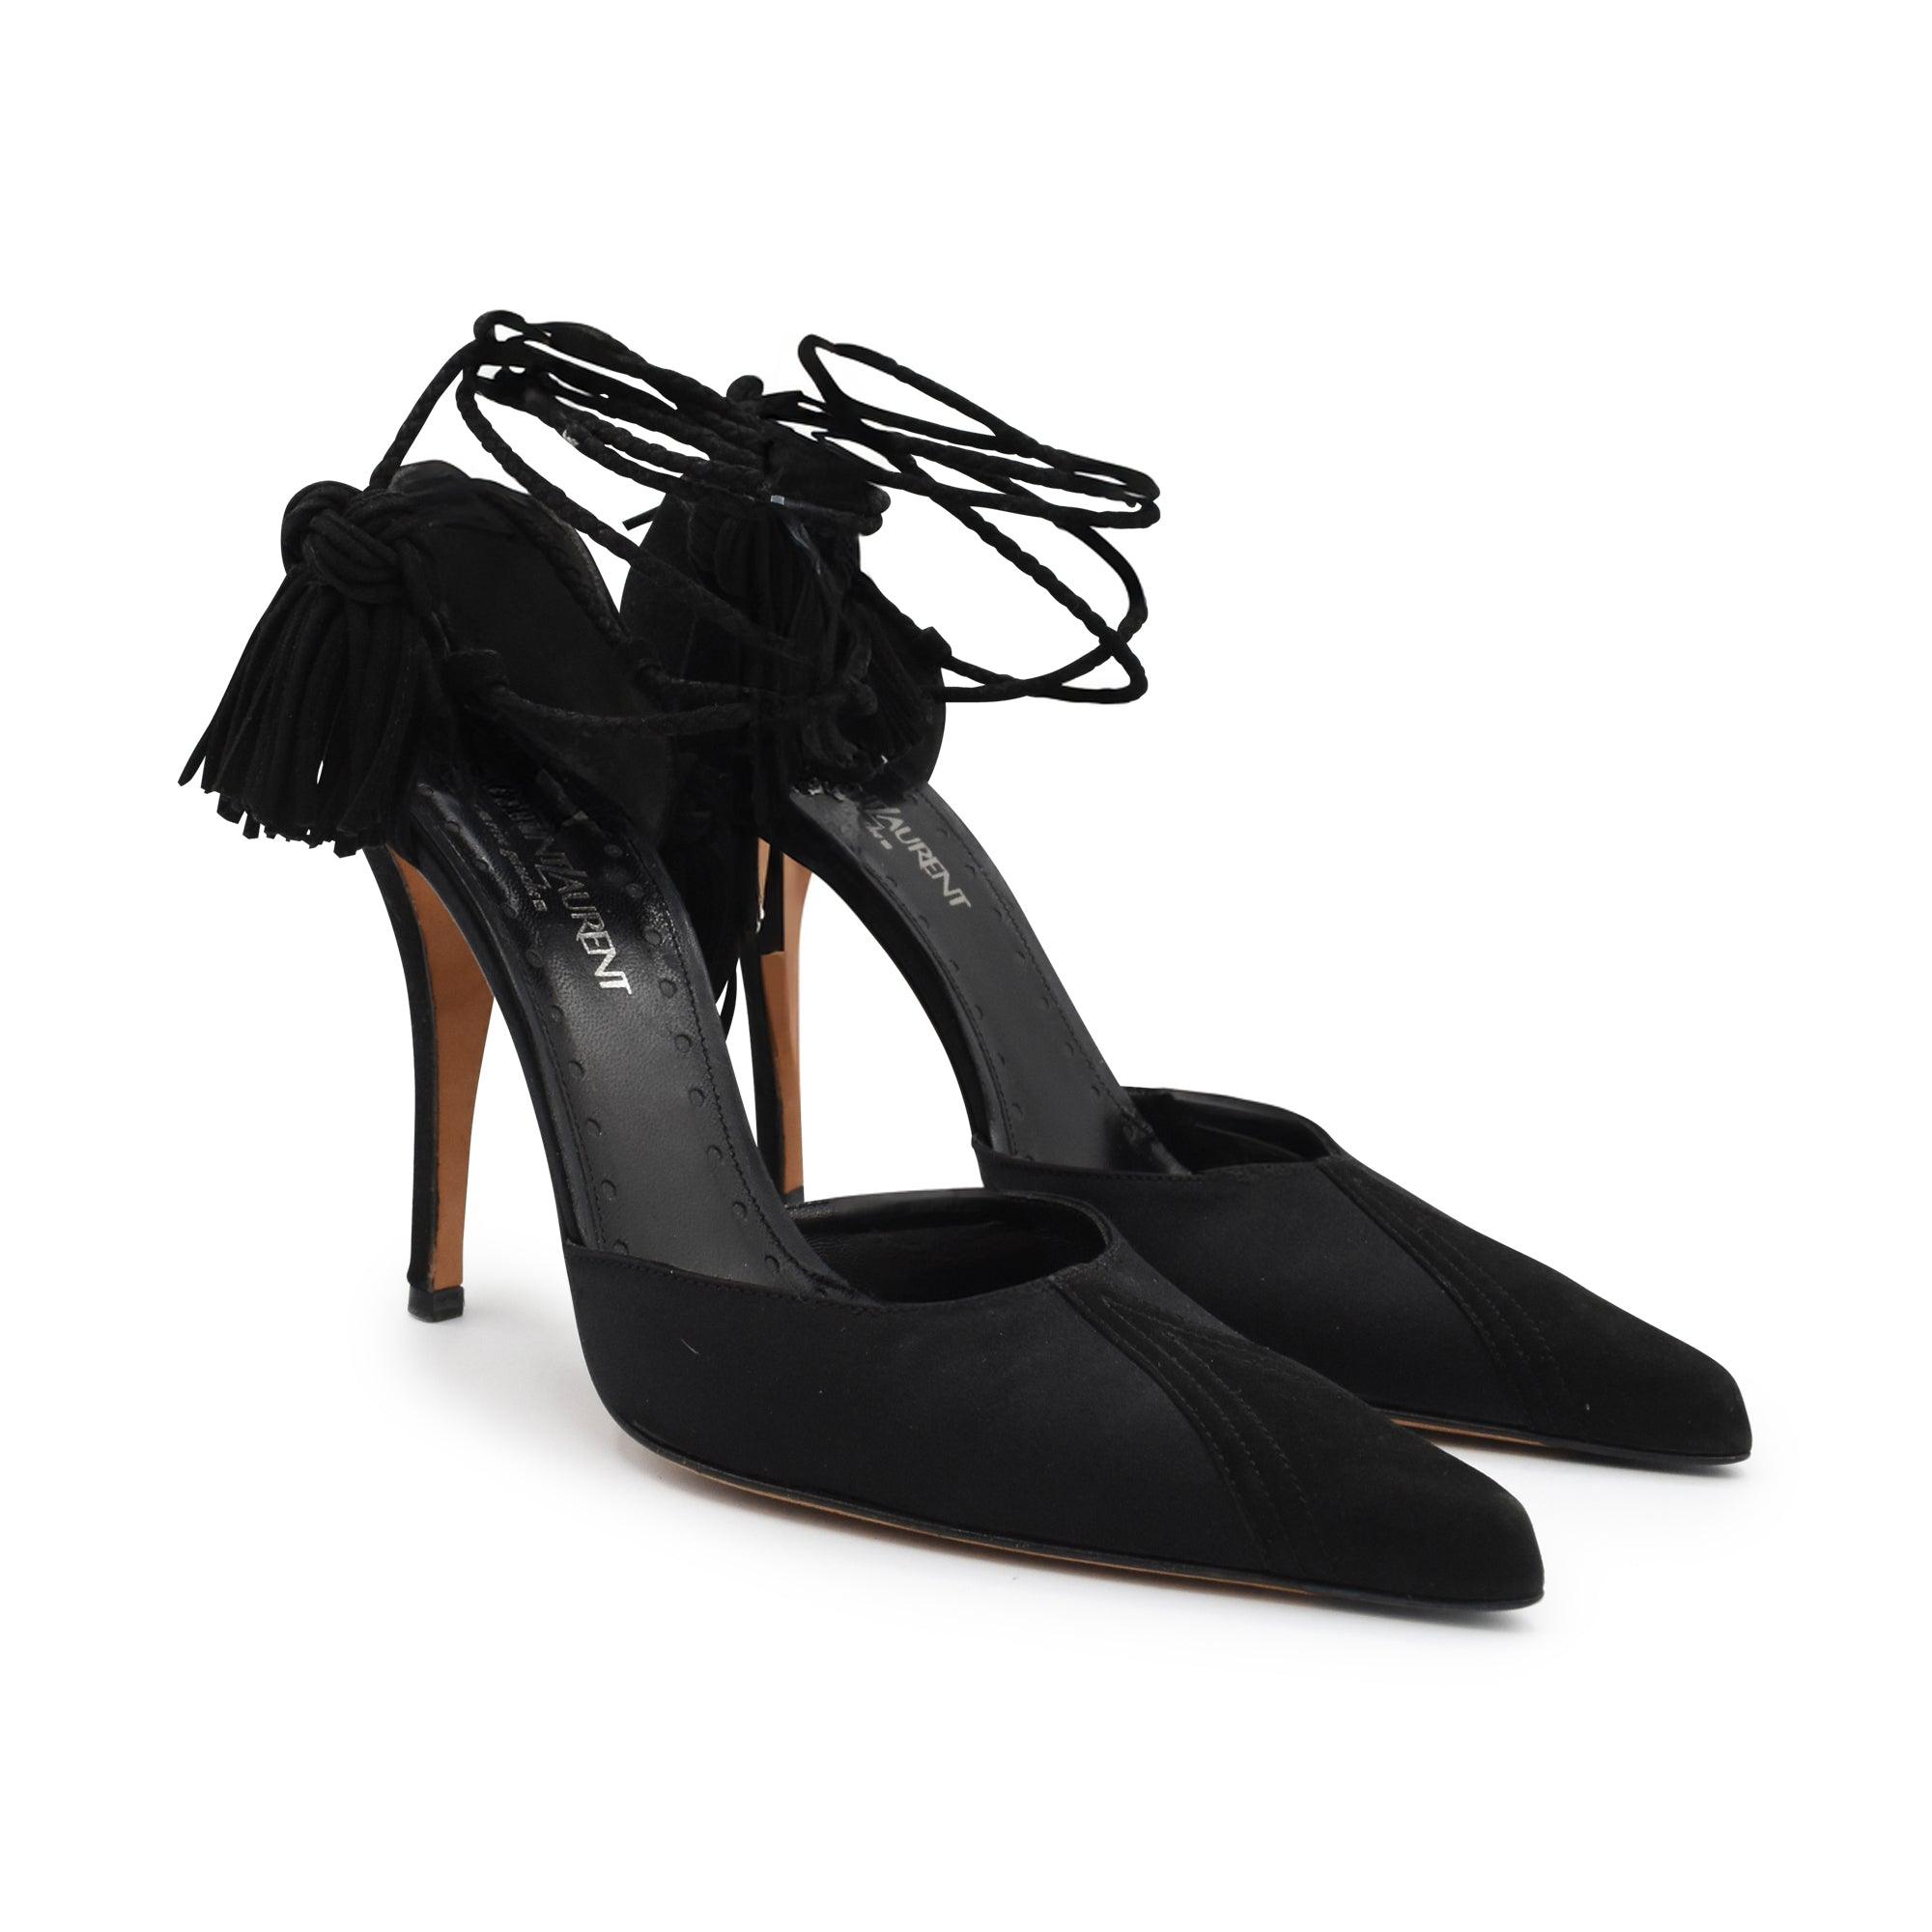 Yves Saint Laurent Heels - 38 - Fashionably Yours